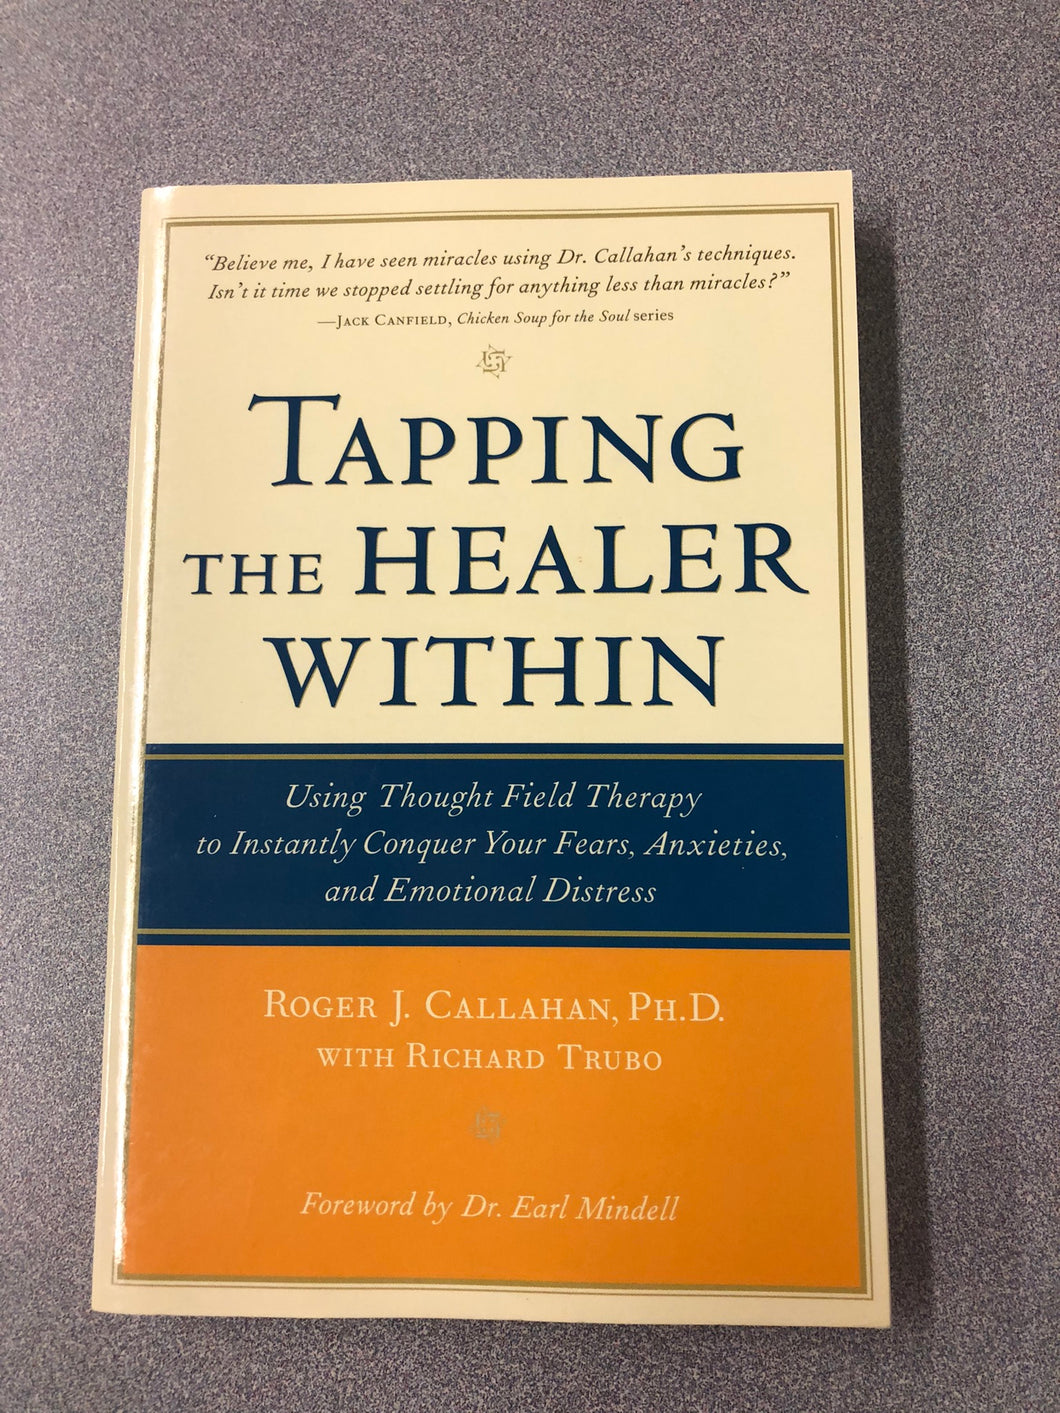 Tapping the Healer Within: Using Thought Field Therapy to Instantly Conquer Your Fears, Anxieties and Emotional Distress, Callahan, Roger J. [2001] PS 8/22